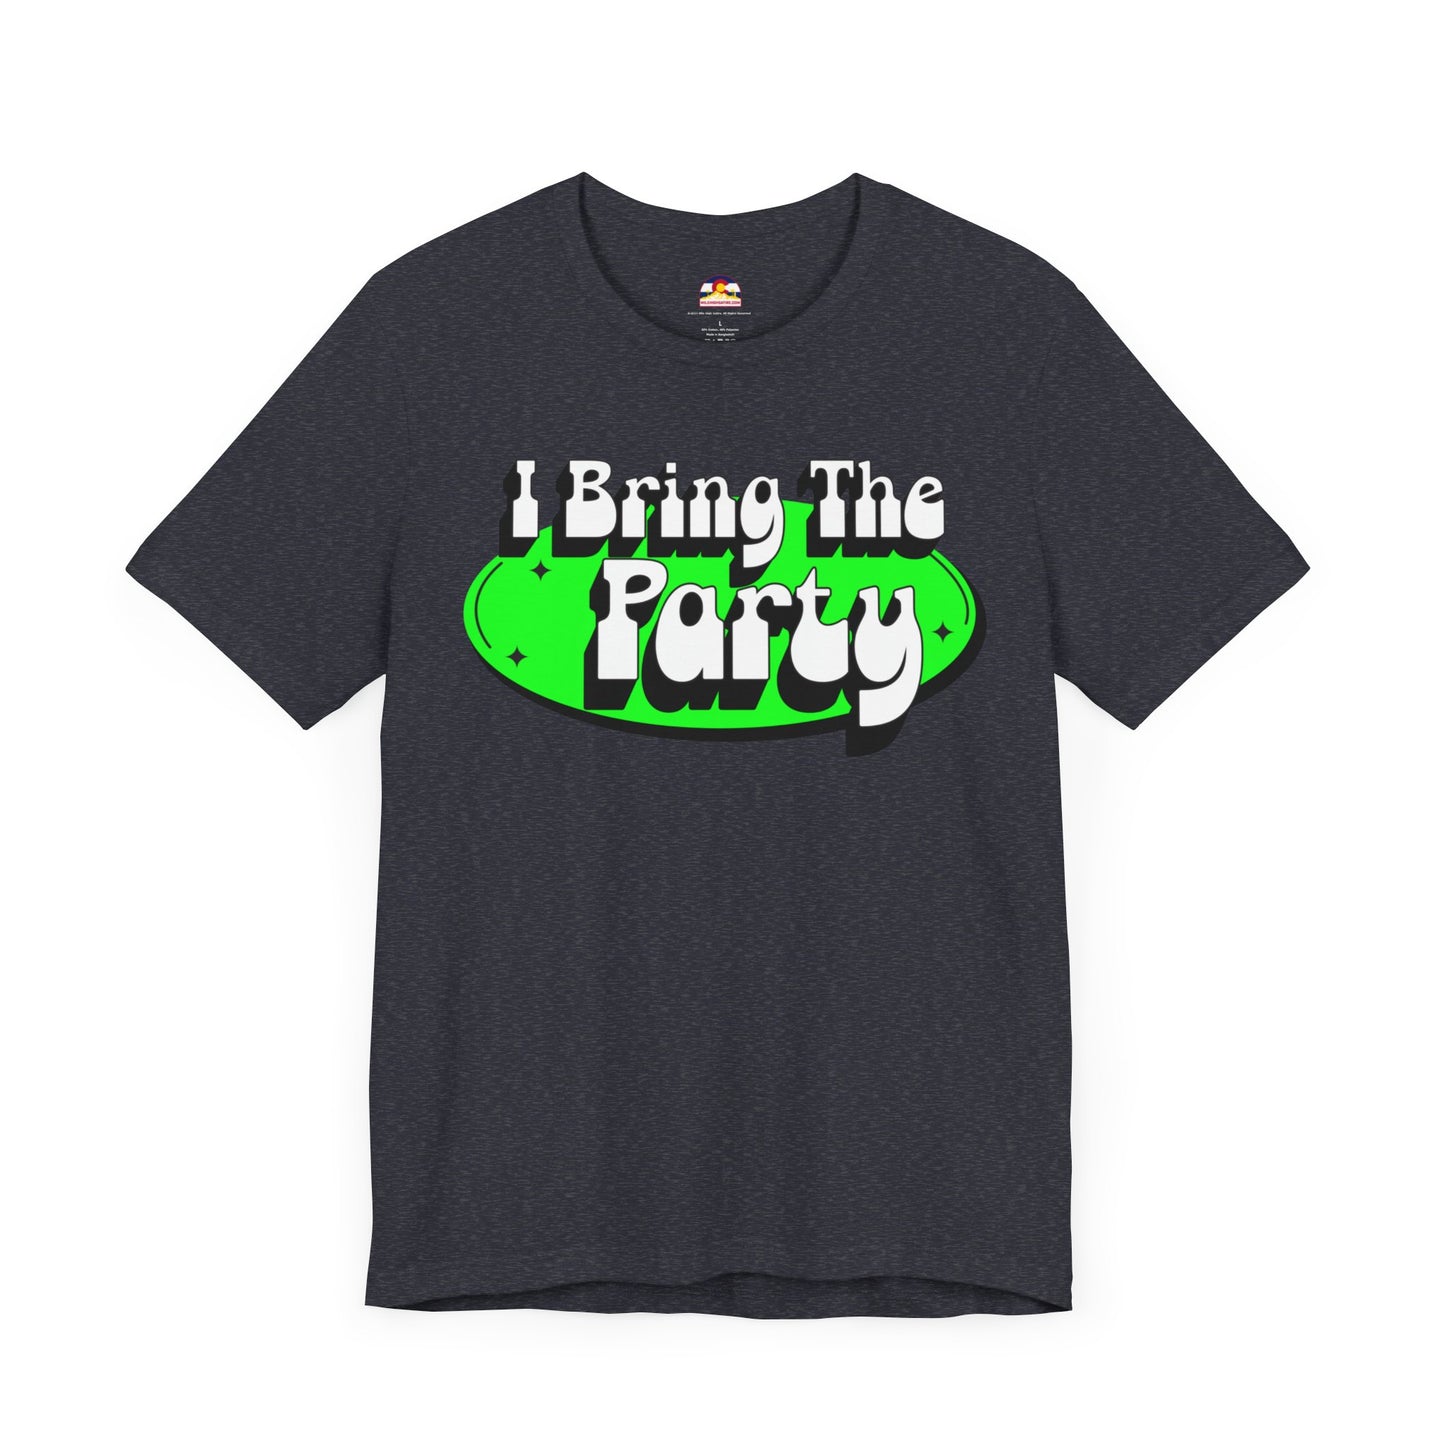 I Bring The Party T-Shirt